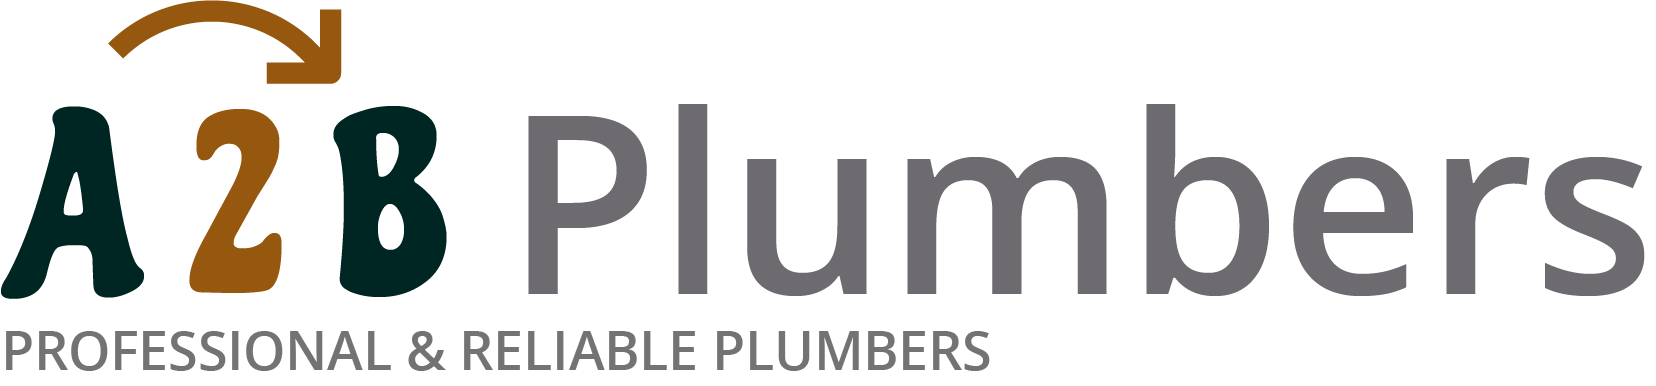 If you need a boiler installed, a radiator repaired or a leaking tap fixed, call us now - we provide services for properties in Gunnersbury and the local area.